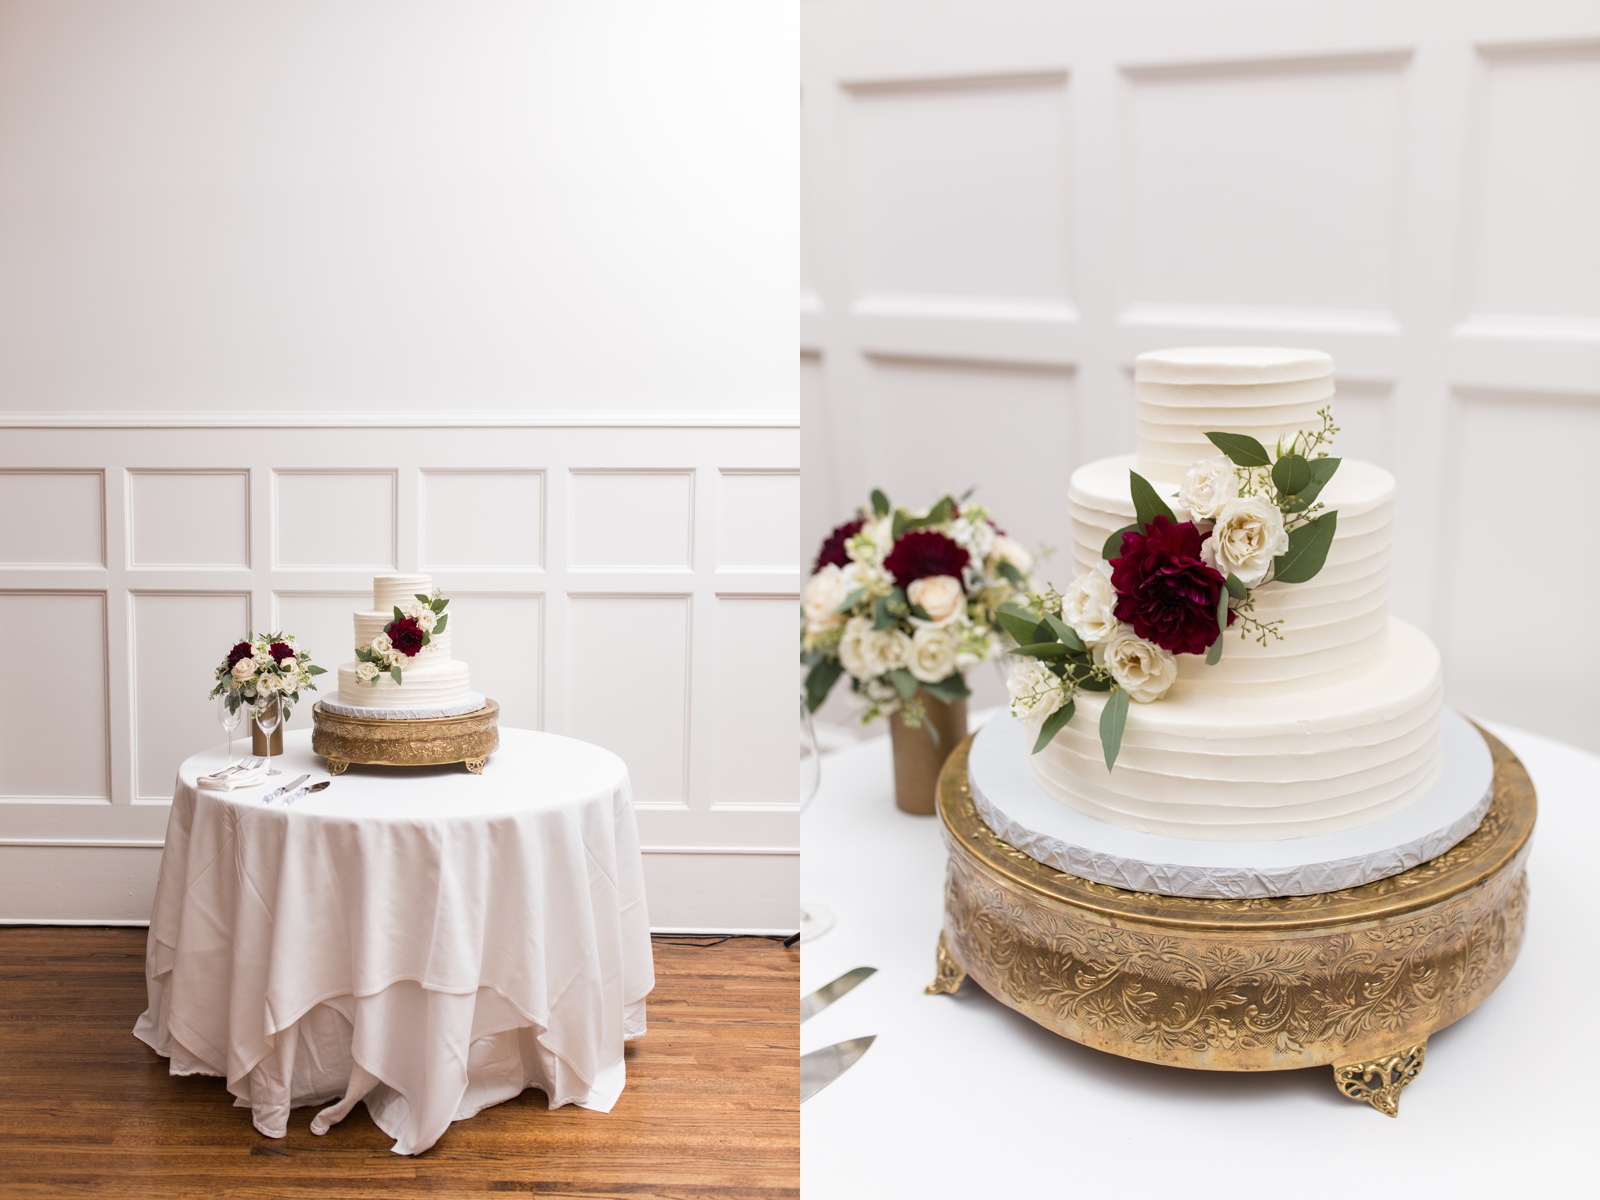 Film Reception details at an austin wedding. White, greenery, and cream wedding colors. Wedding cake with red, burgundy, and wine flowers